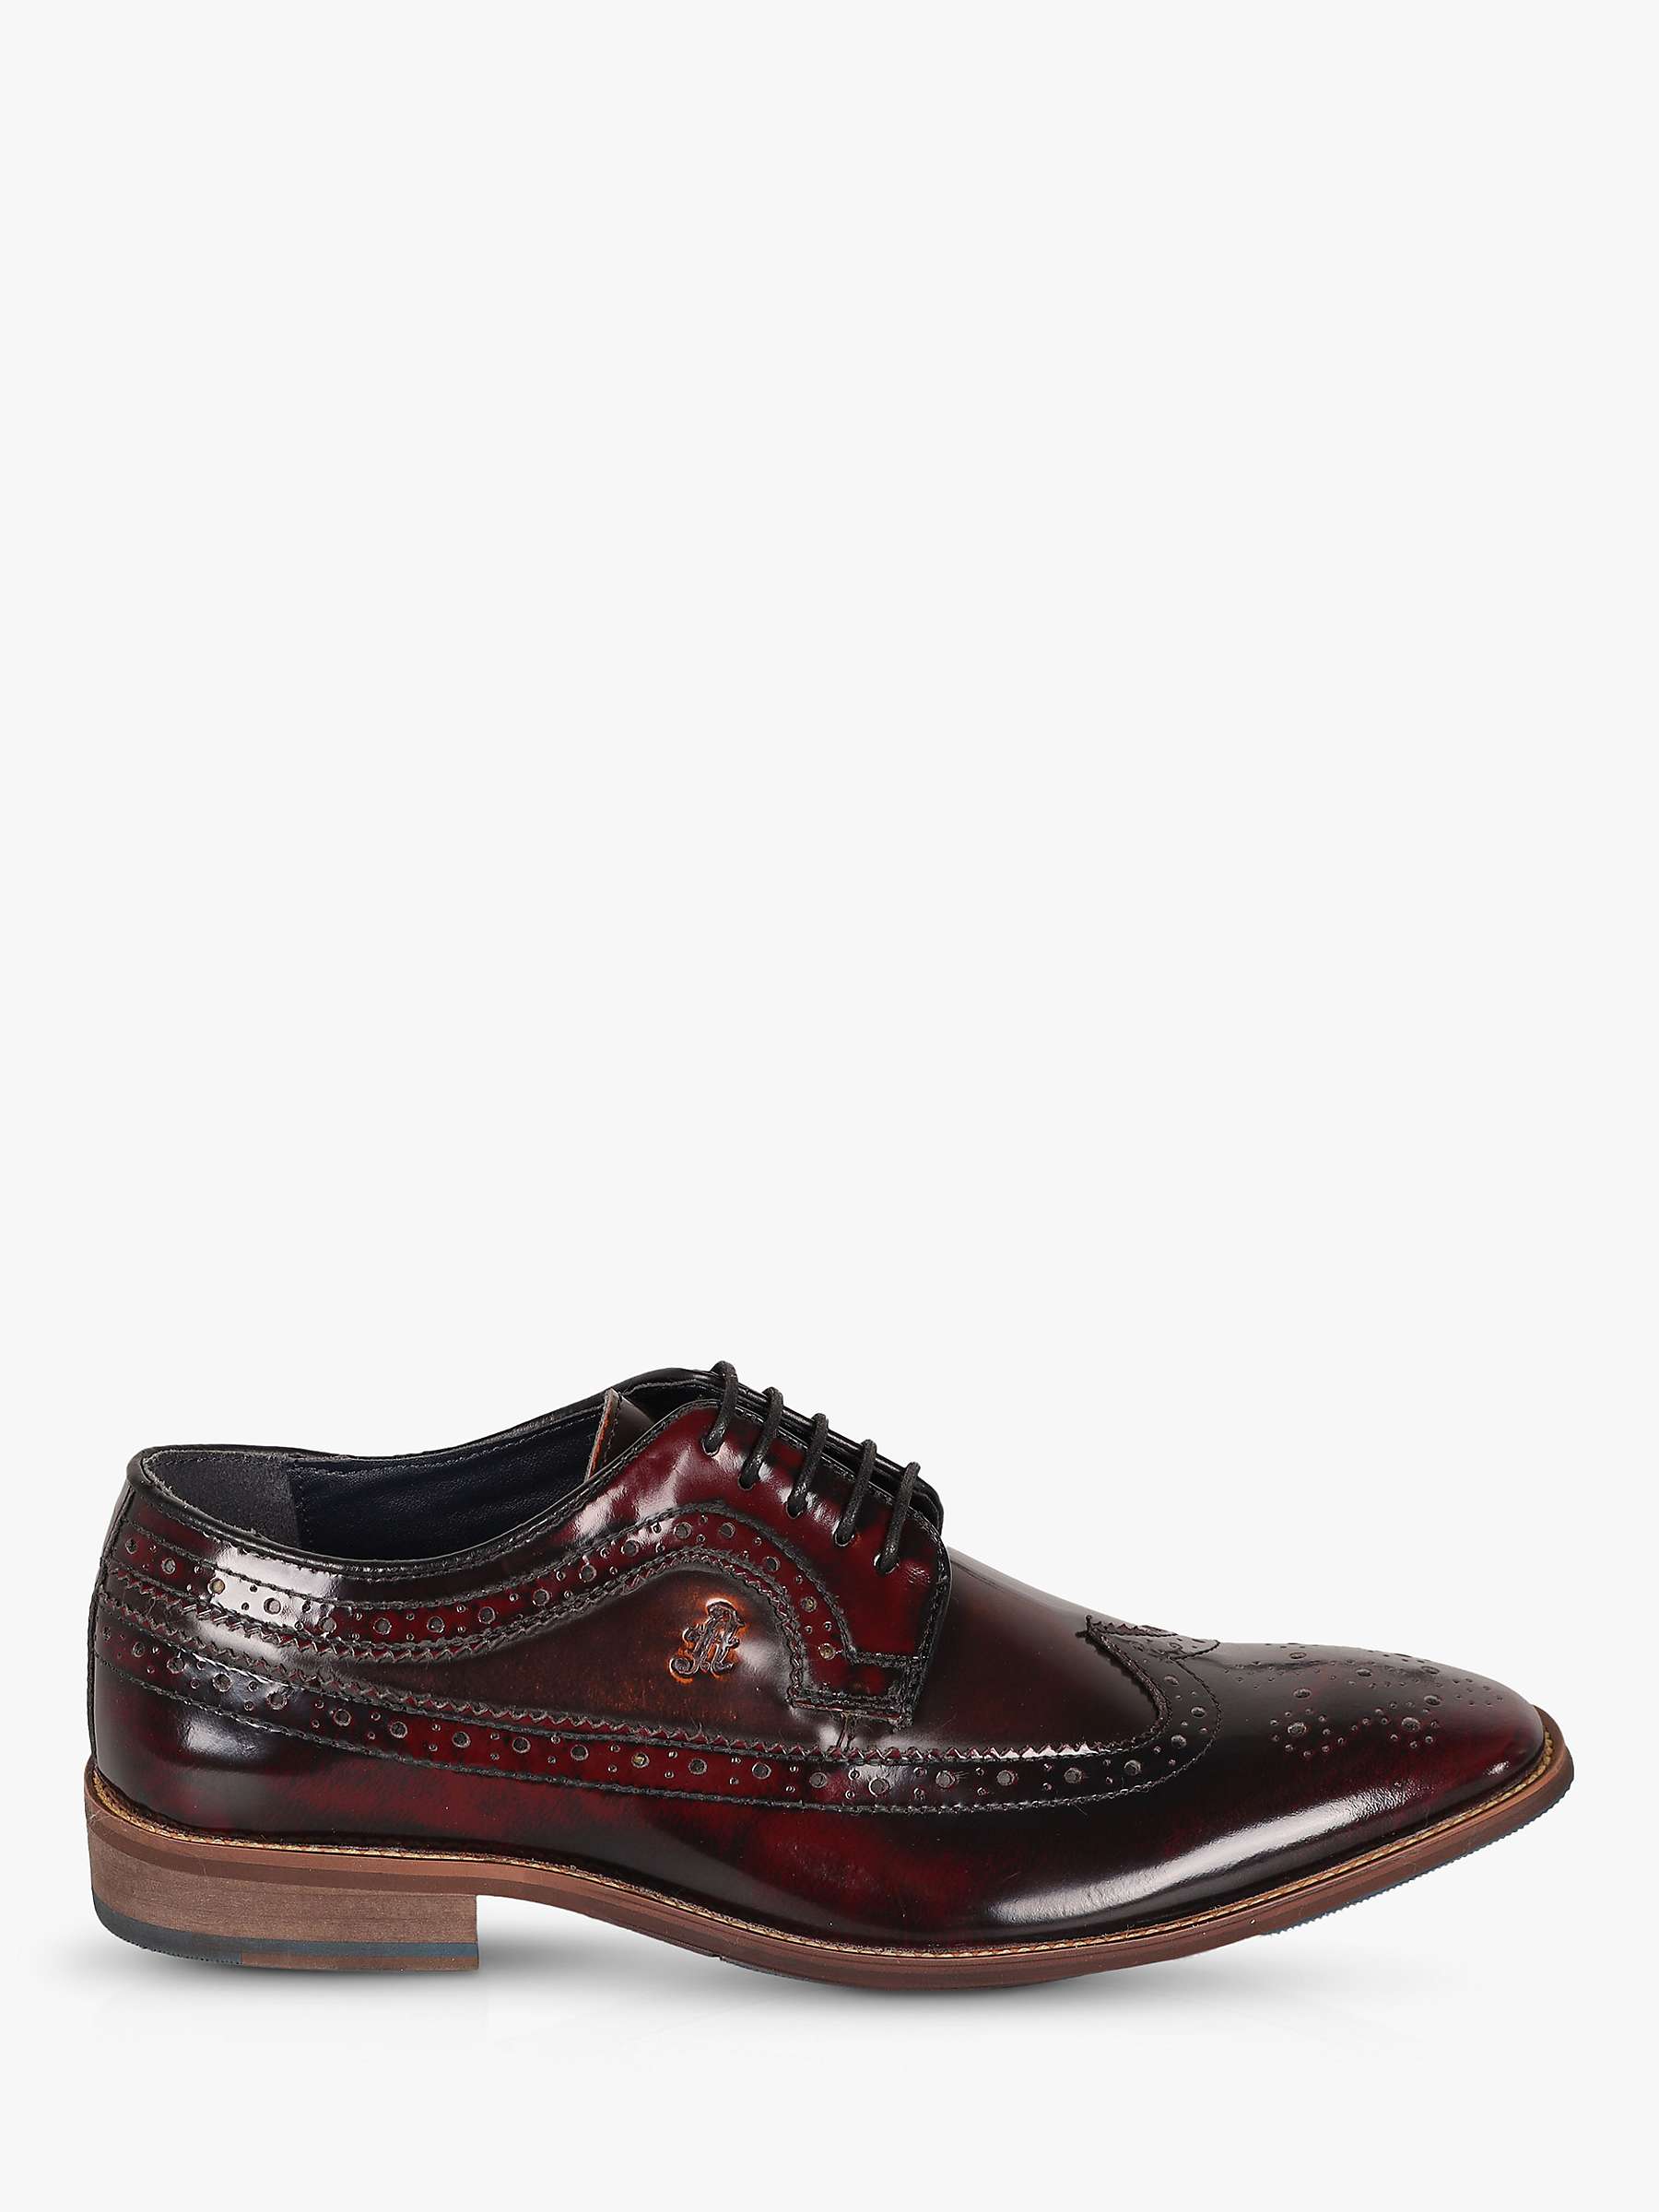 Buy Silver Street London Amen Collection Dublin Patent Leather Brogues, Oxblood Online at johnlewis.com